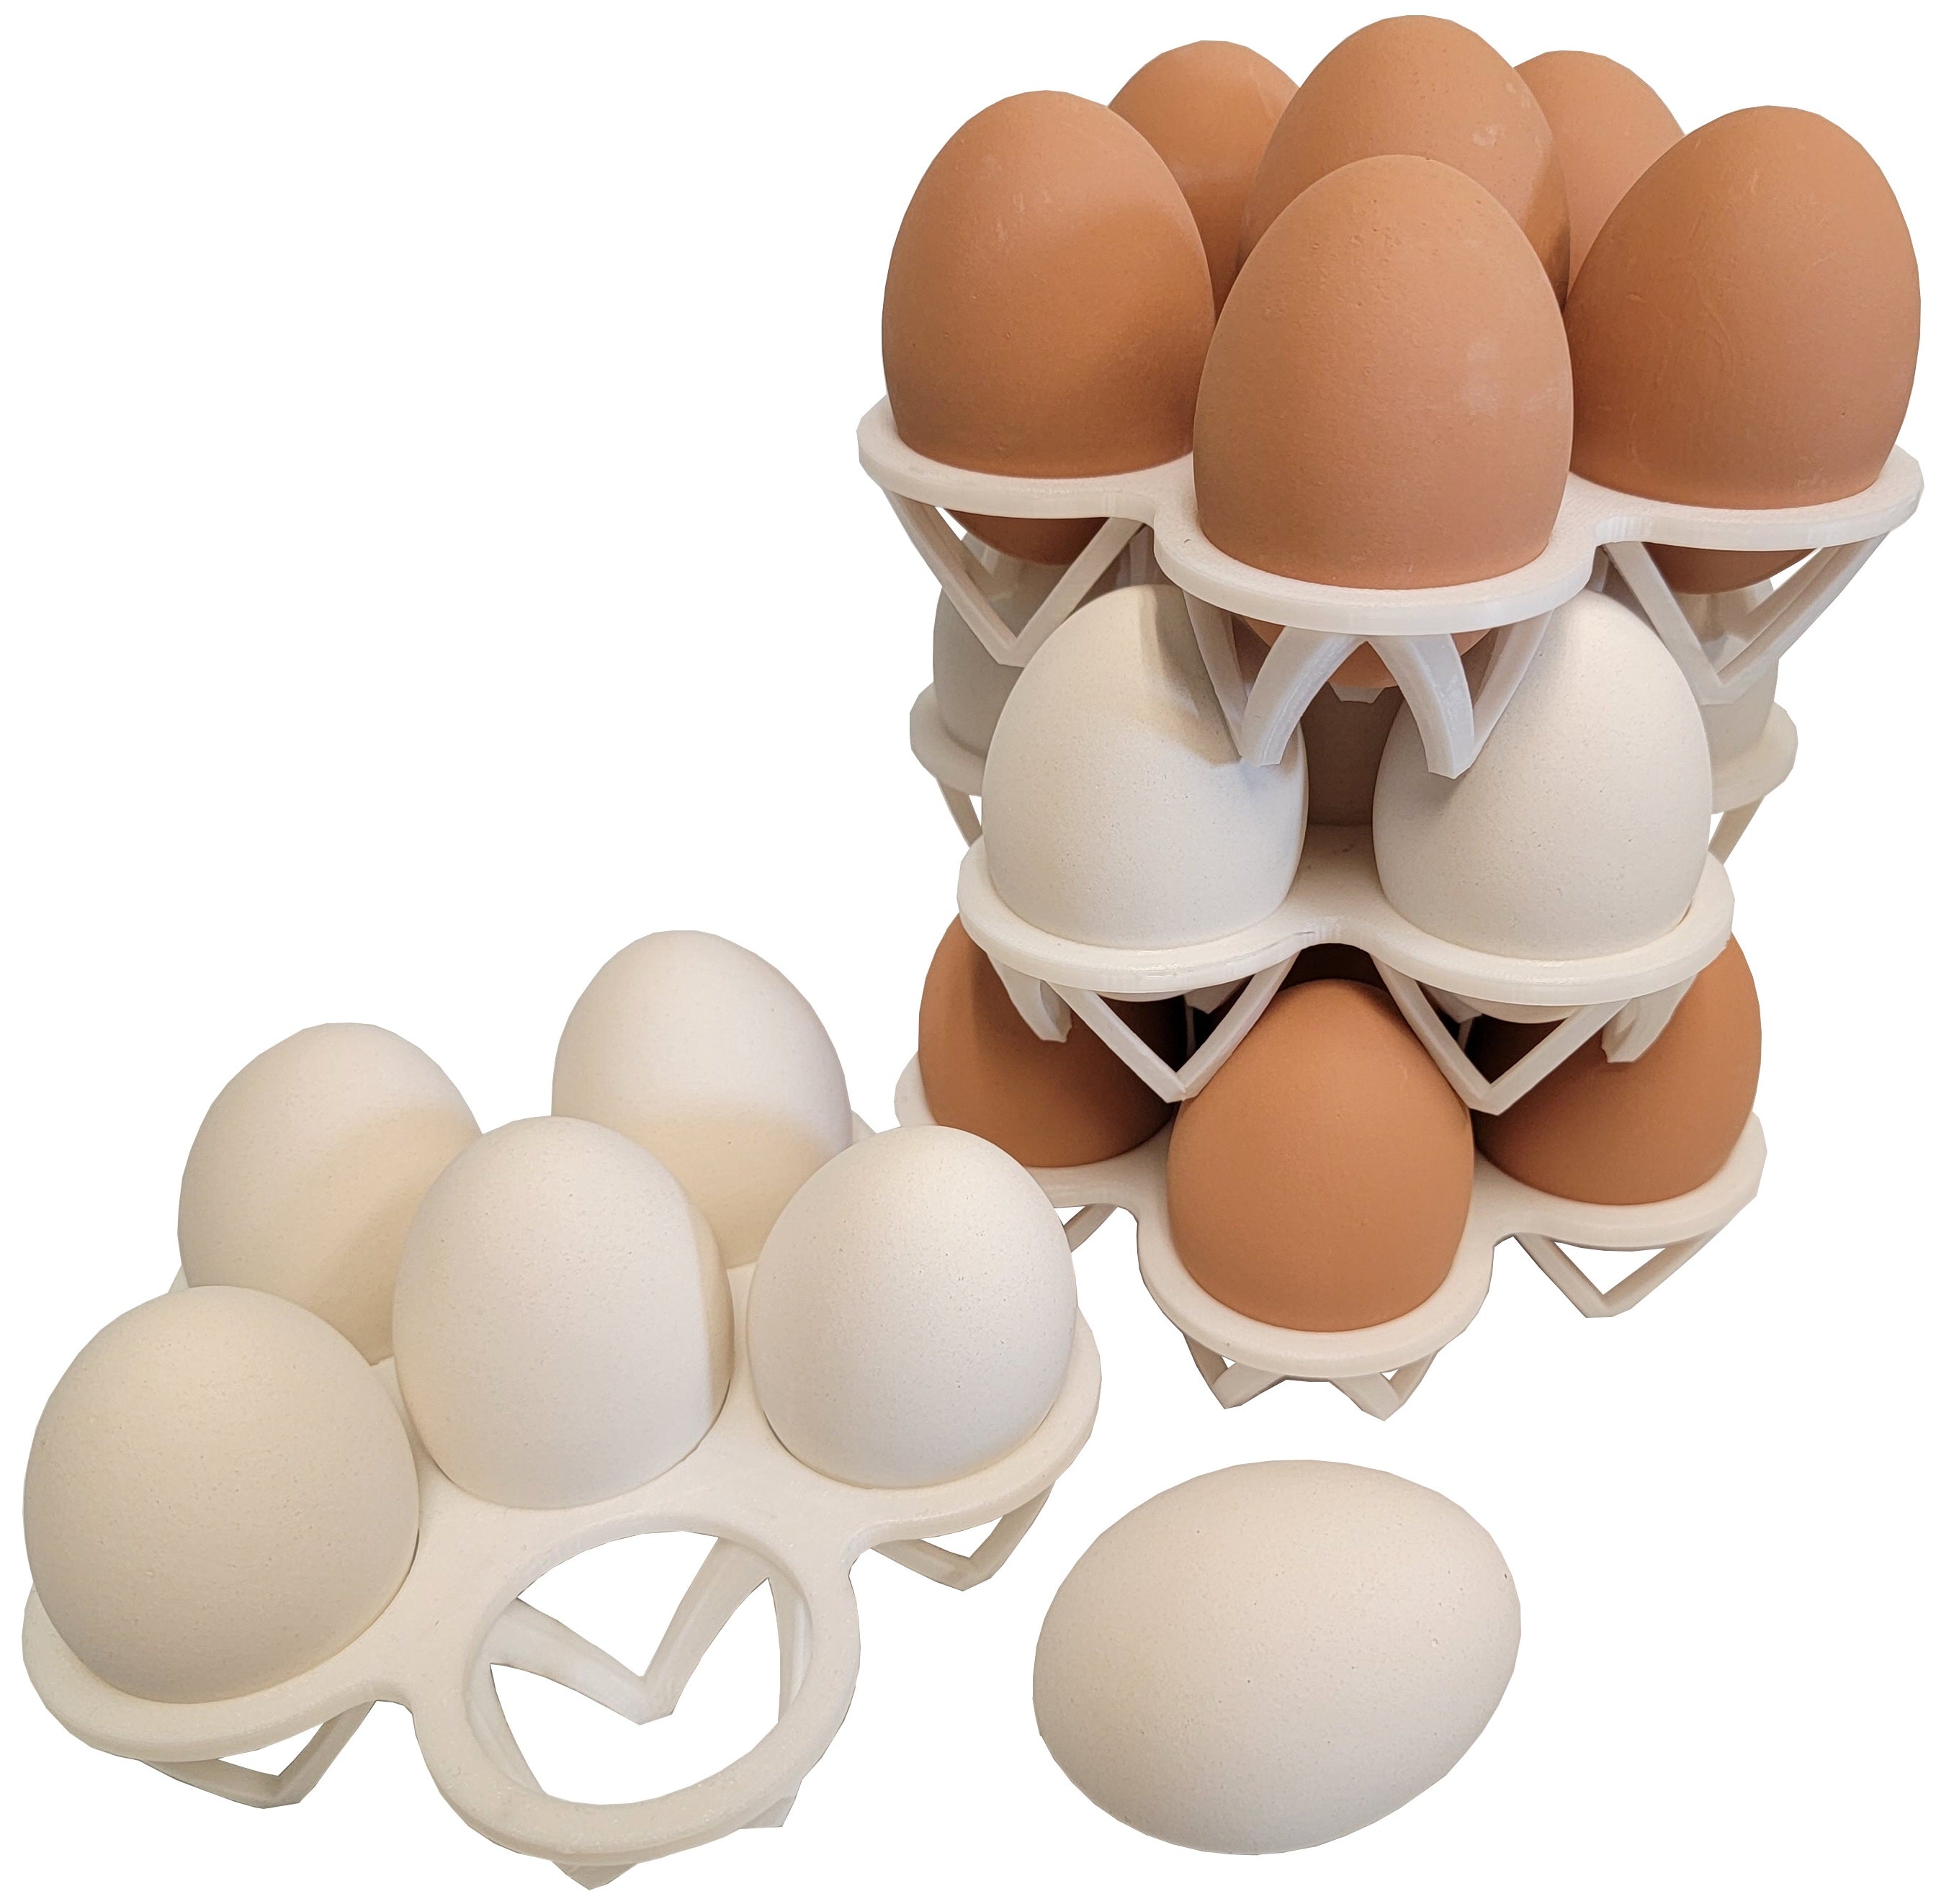 4 Pack of Rite Farm Products 6 Chicken Egg Poly Stacking Trays For 24 Eggs Total